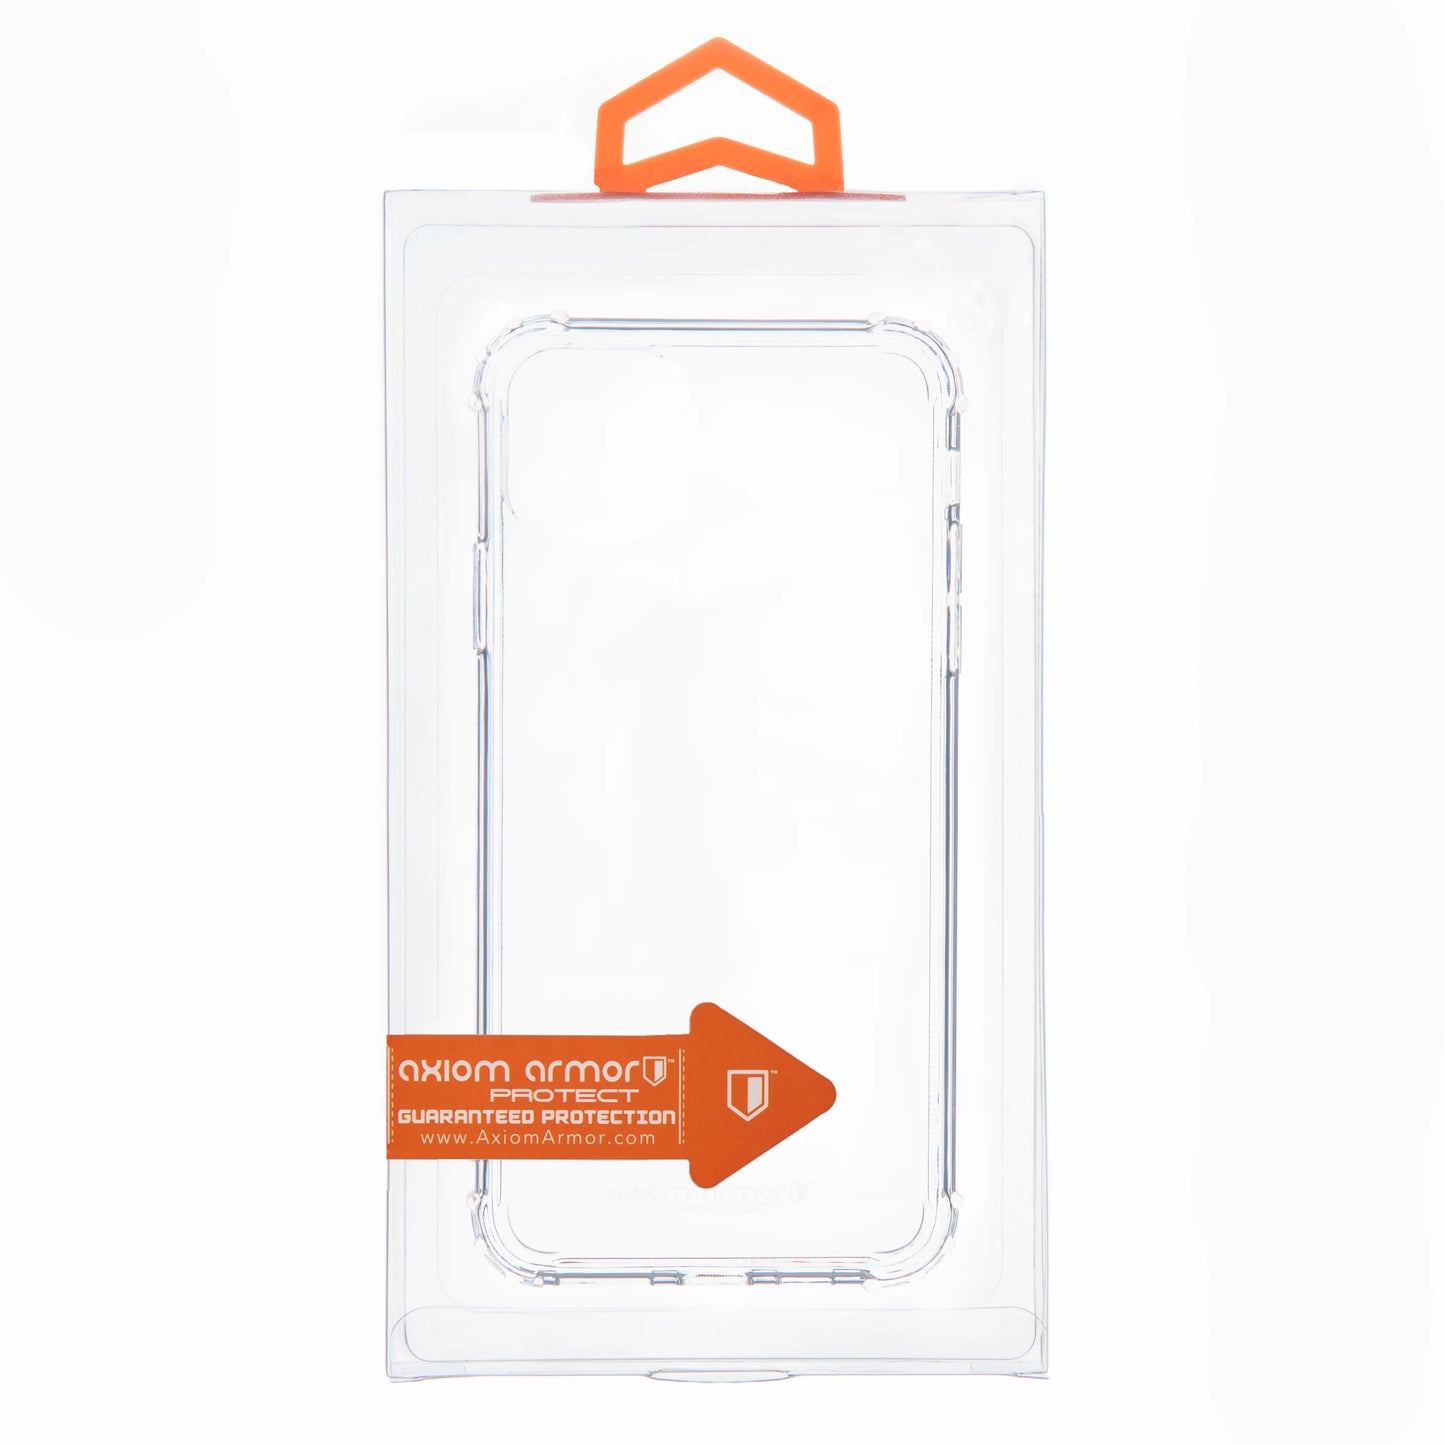 Protect Case - iPhone 11 Pro